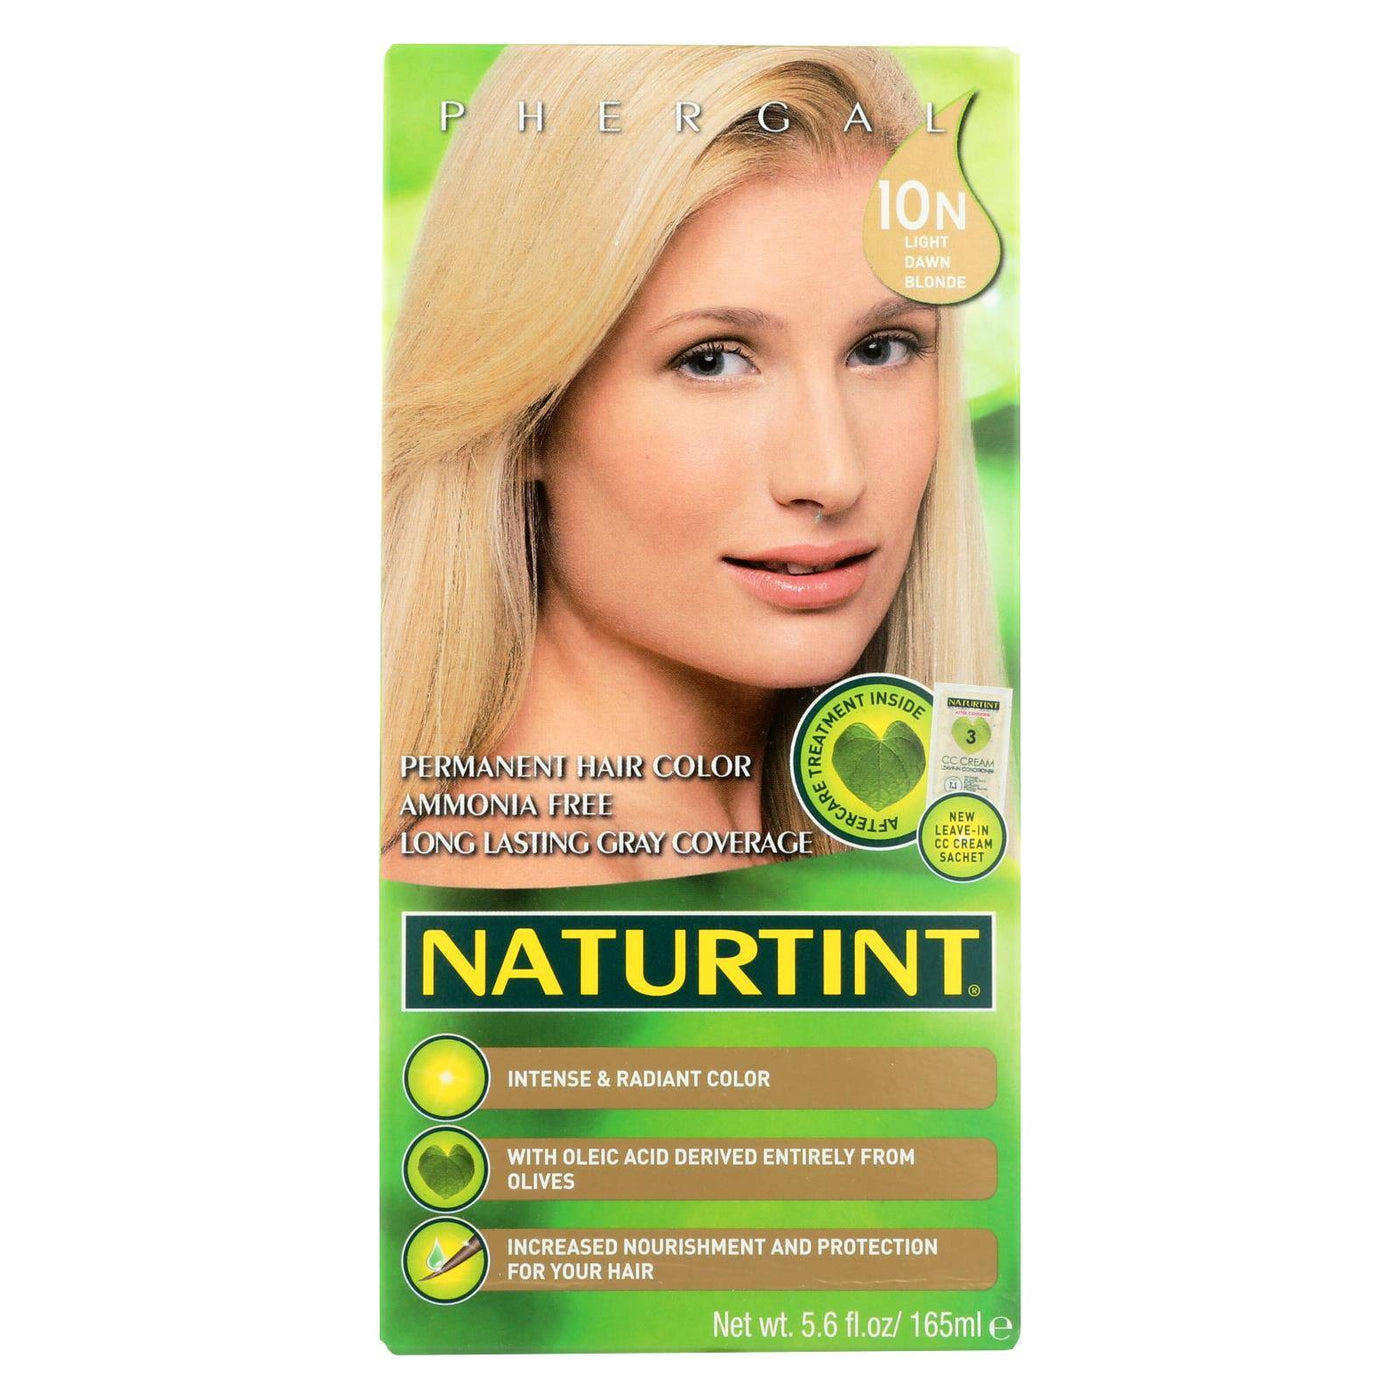 Buy Naturtint Hair Color - Permanent - 10n - Light Dawn Blonde - 5.28 Oz  at OnlyNaturals.us